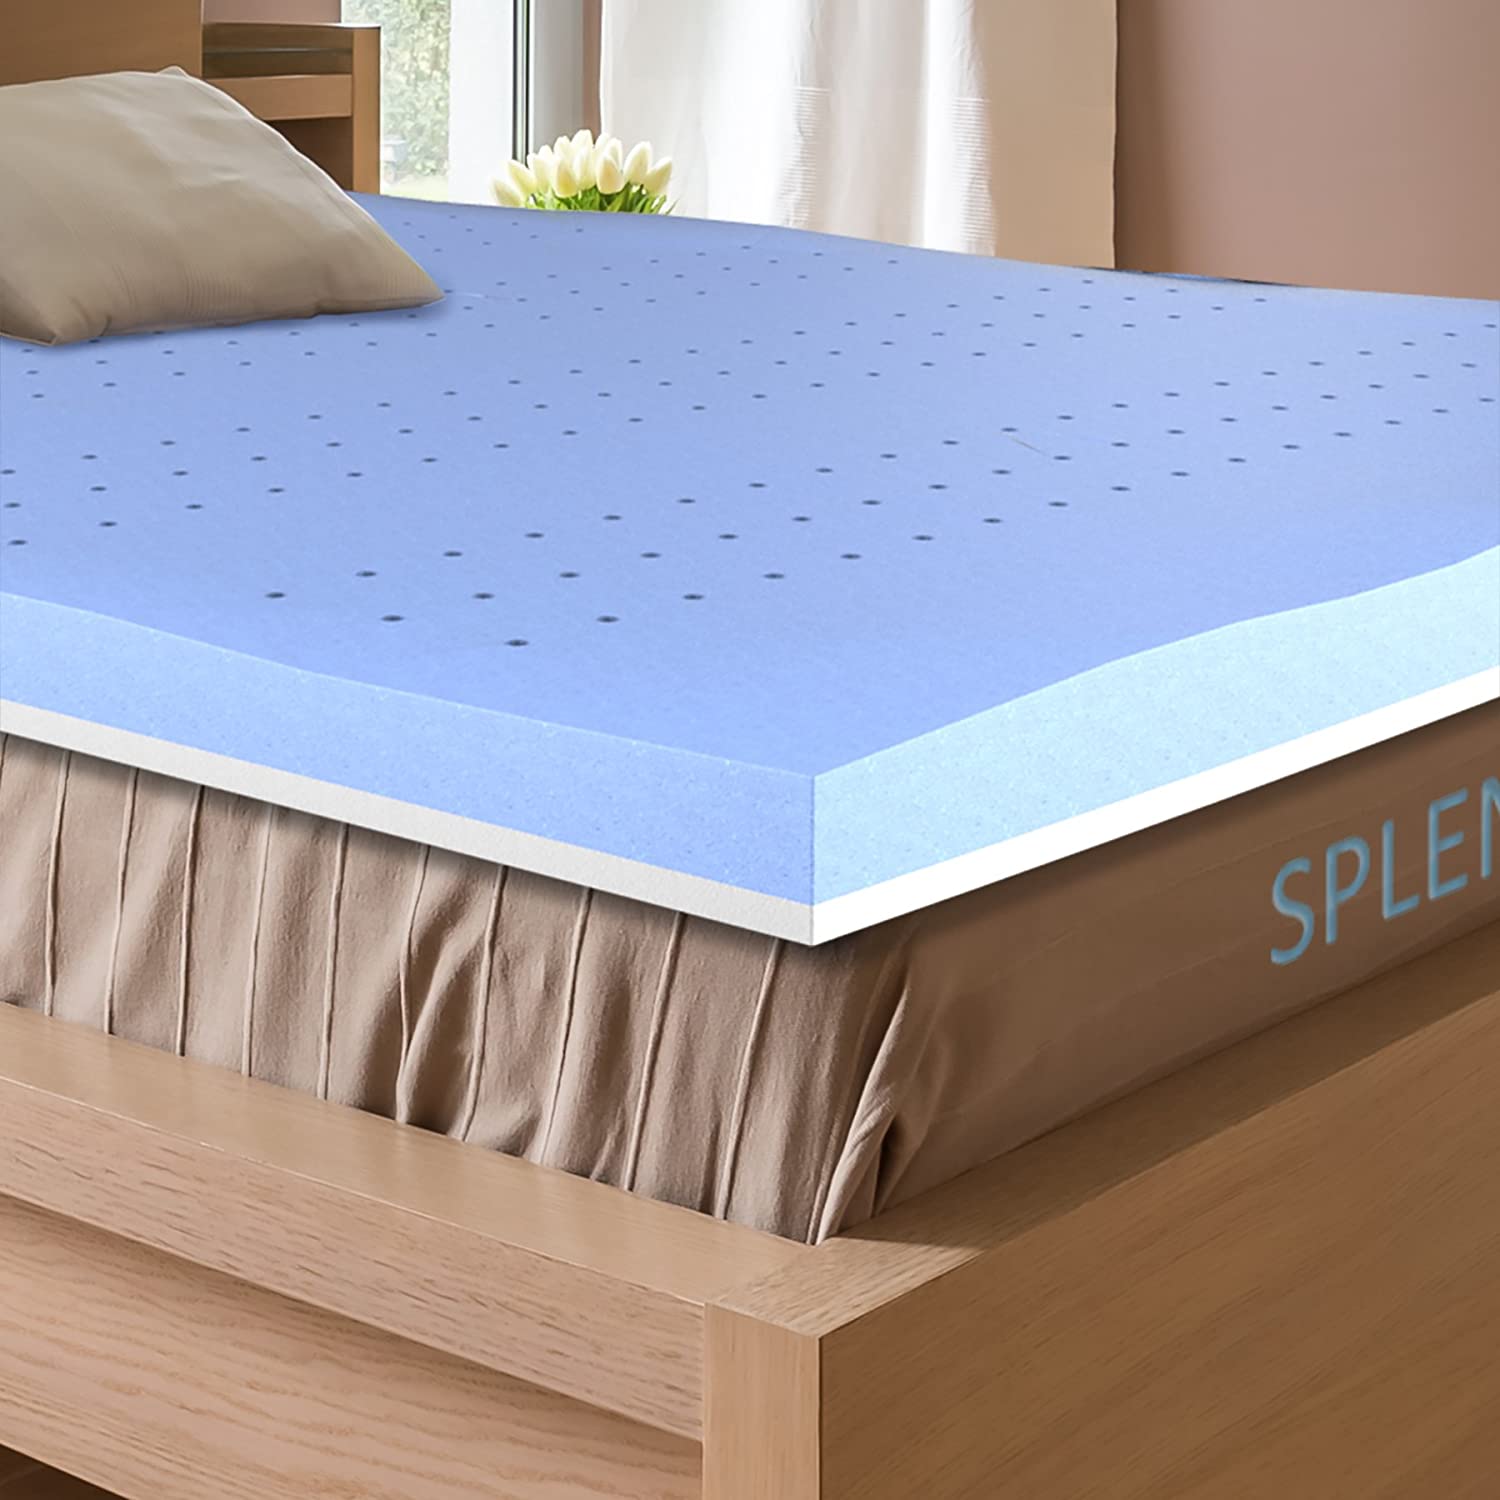 Amazon.com: Firm 3 Inch Memory Foam Mattress Topper for Queen Size Bed ...